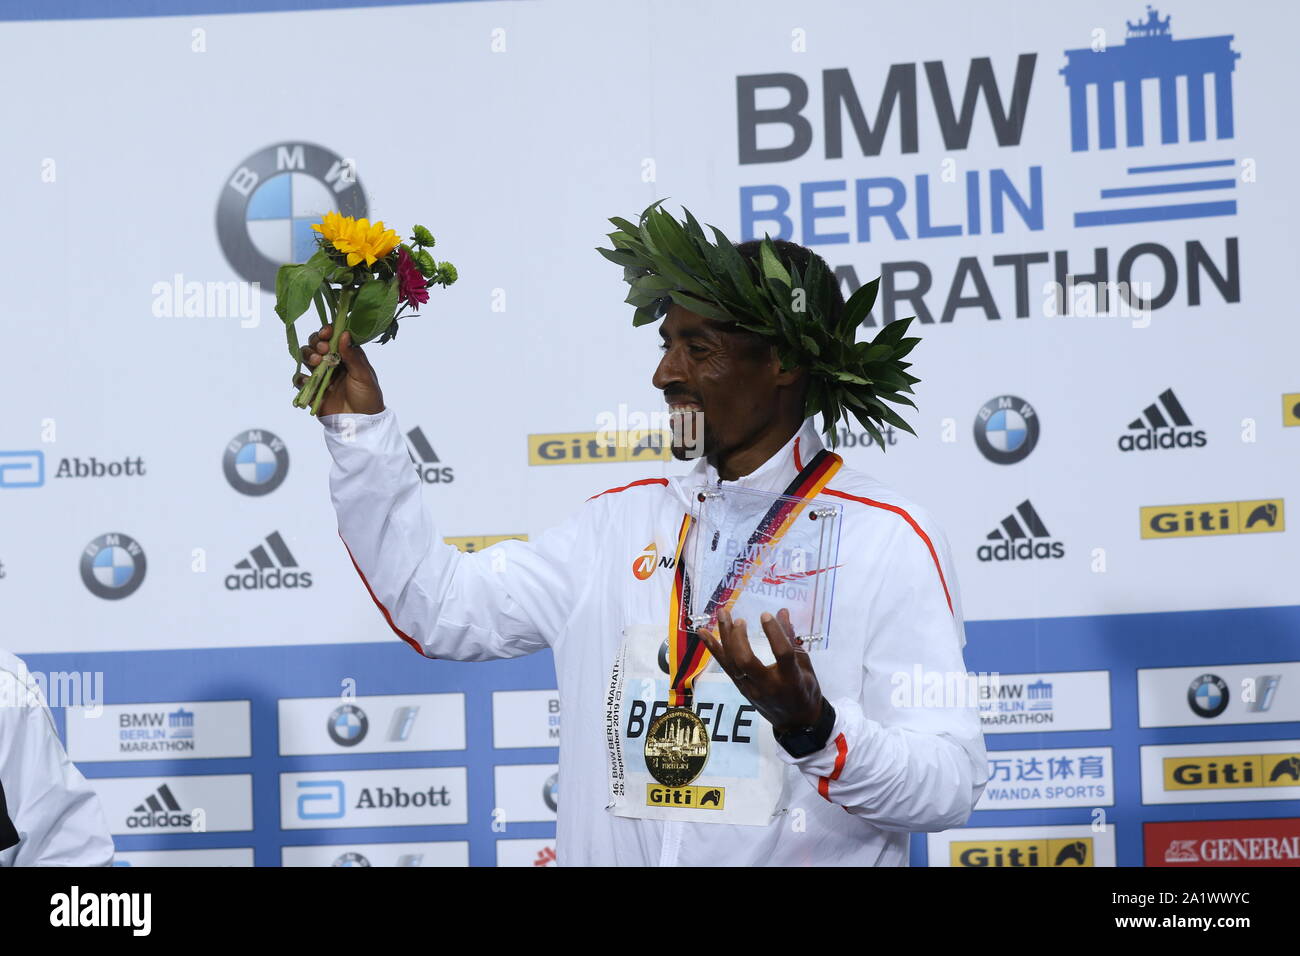 09/19/2019, Berlin, Germany,Kenenisa Bekele at the award ceremony. Kenenisa Bekele from Ethiopia wins the 46th Berlin Marathon in 02:01:41 hours. Birhanu Legese (2:02:48) wins the second place and Sisay Lemma (2:03:36) comes in third place. Stock Photo